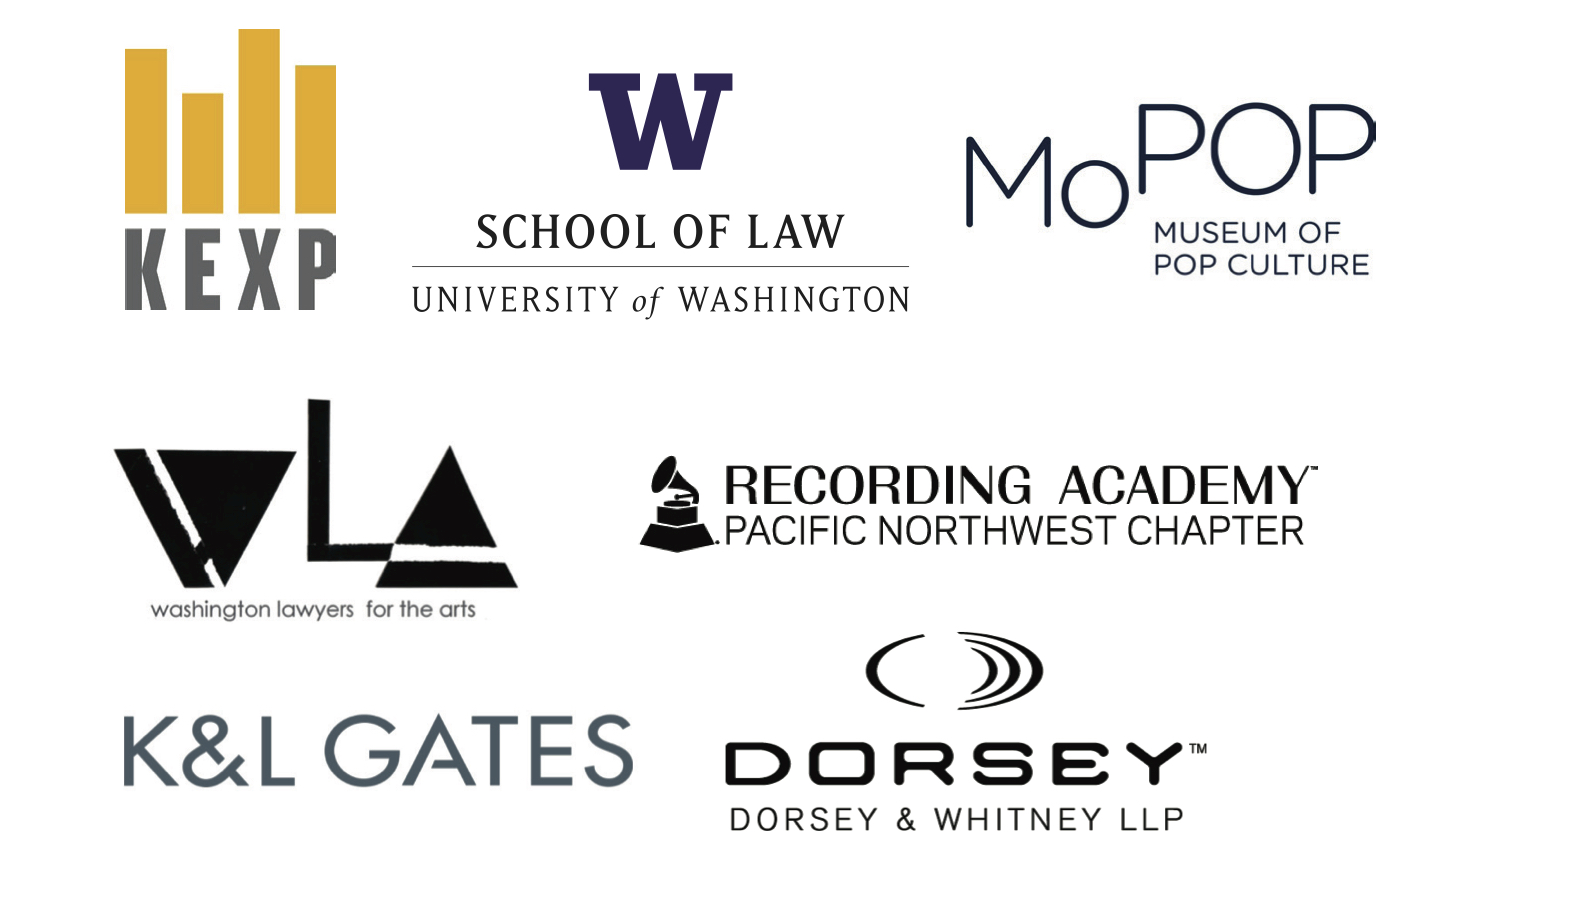 The New Music Ecosystem Conference Co-sponsors